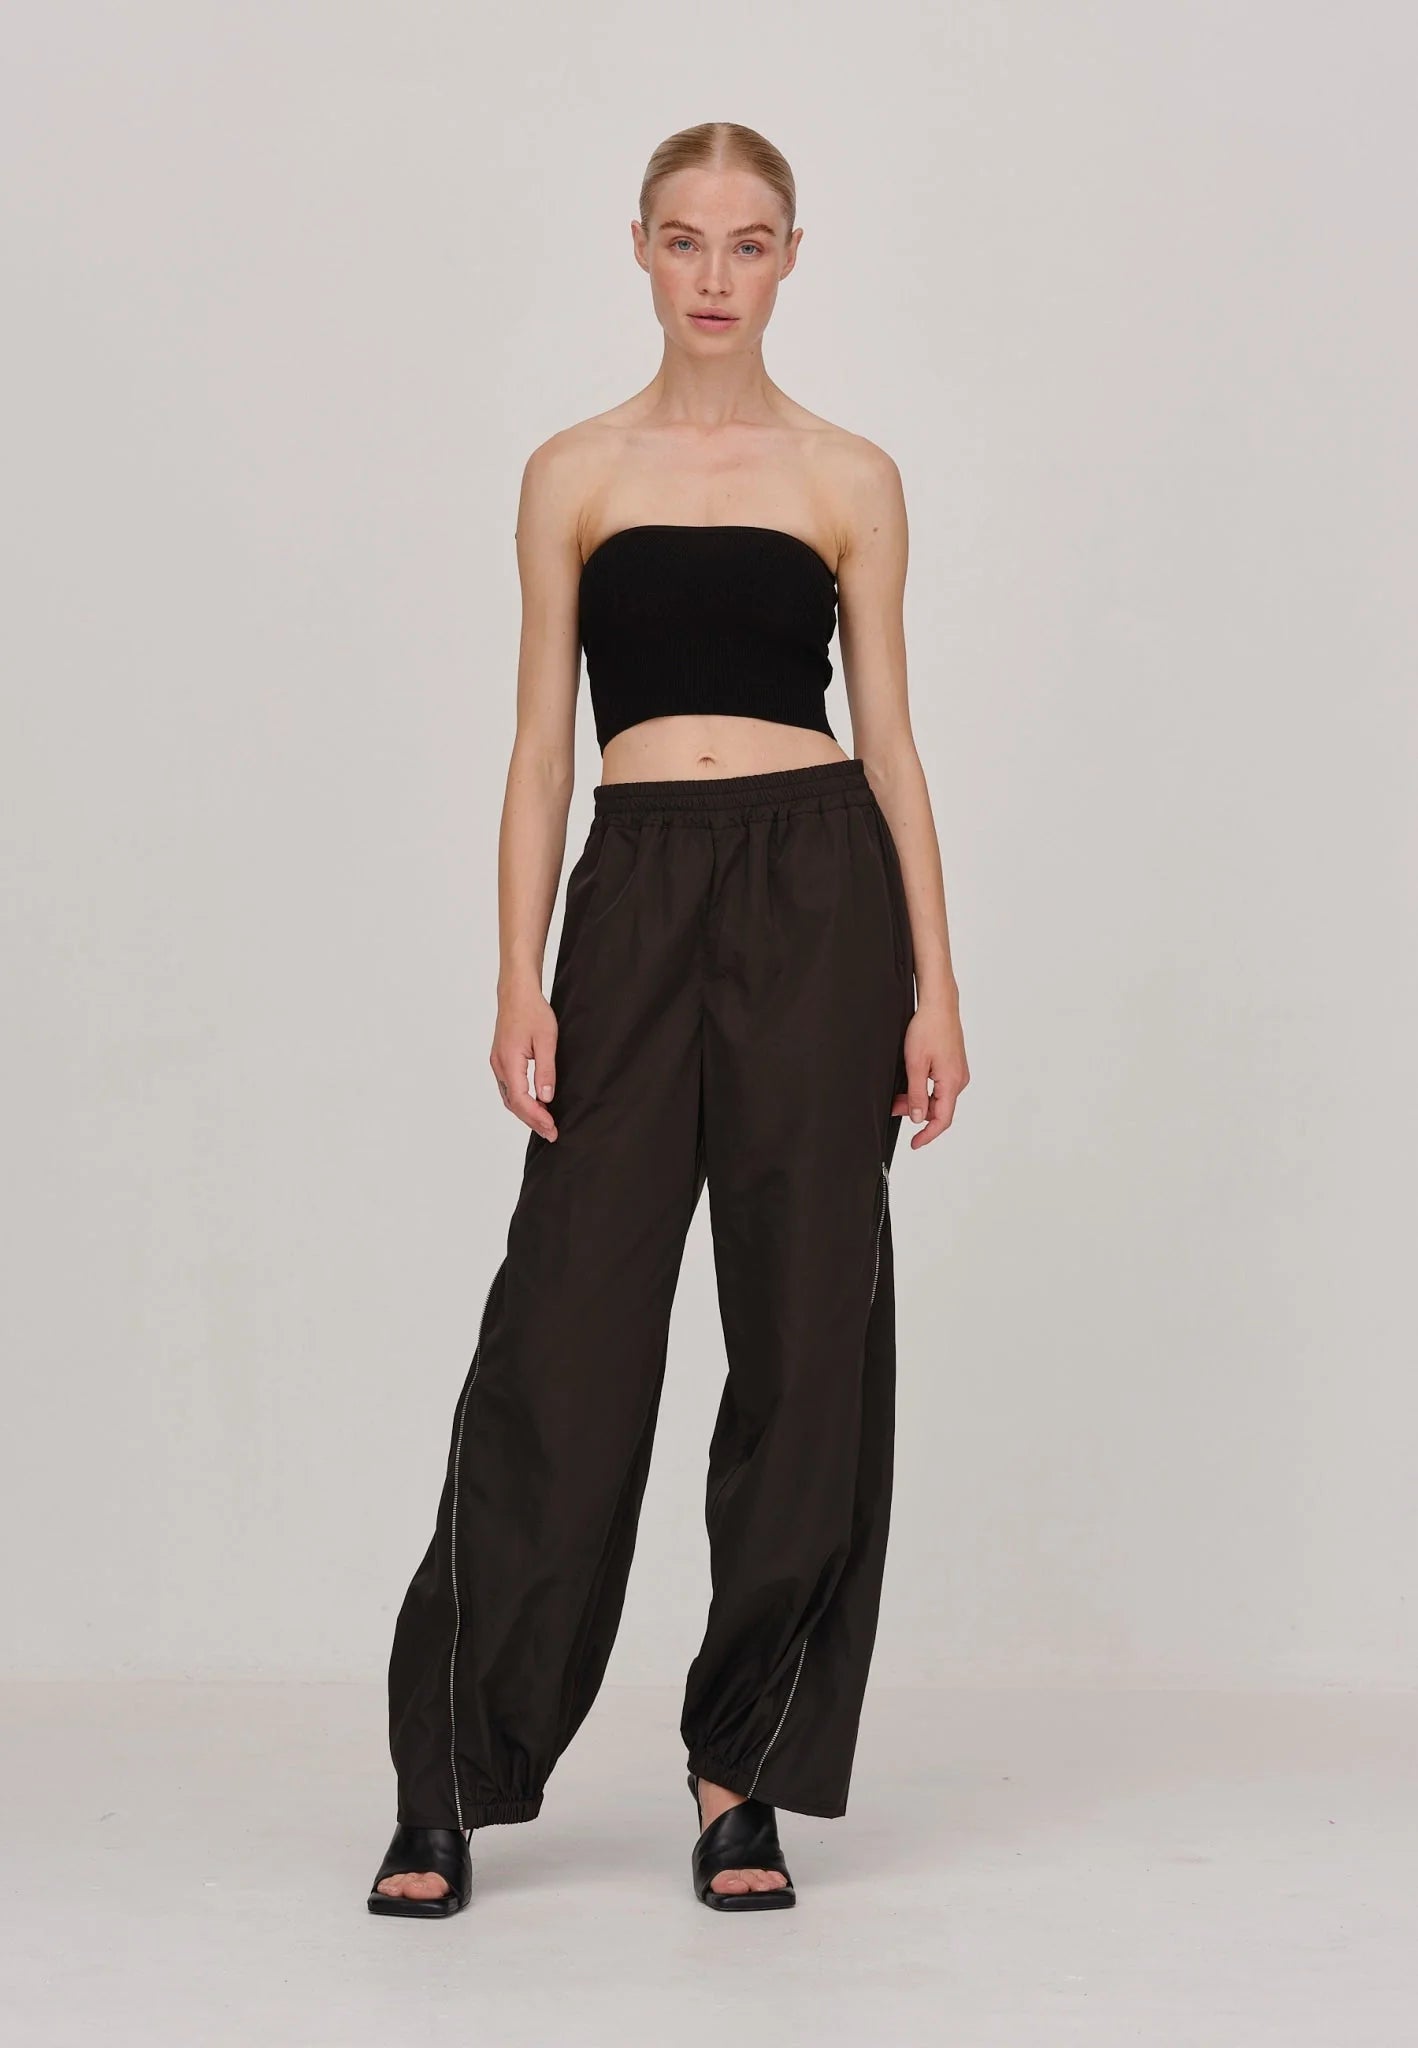 herskind tracy pants